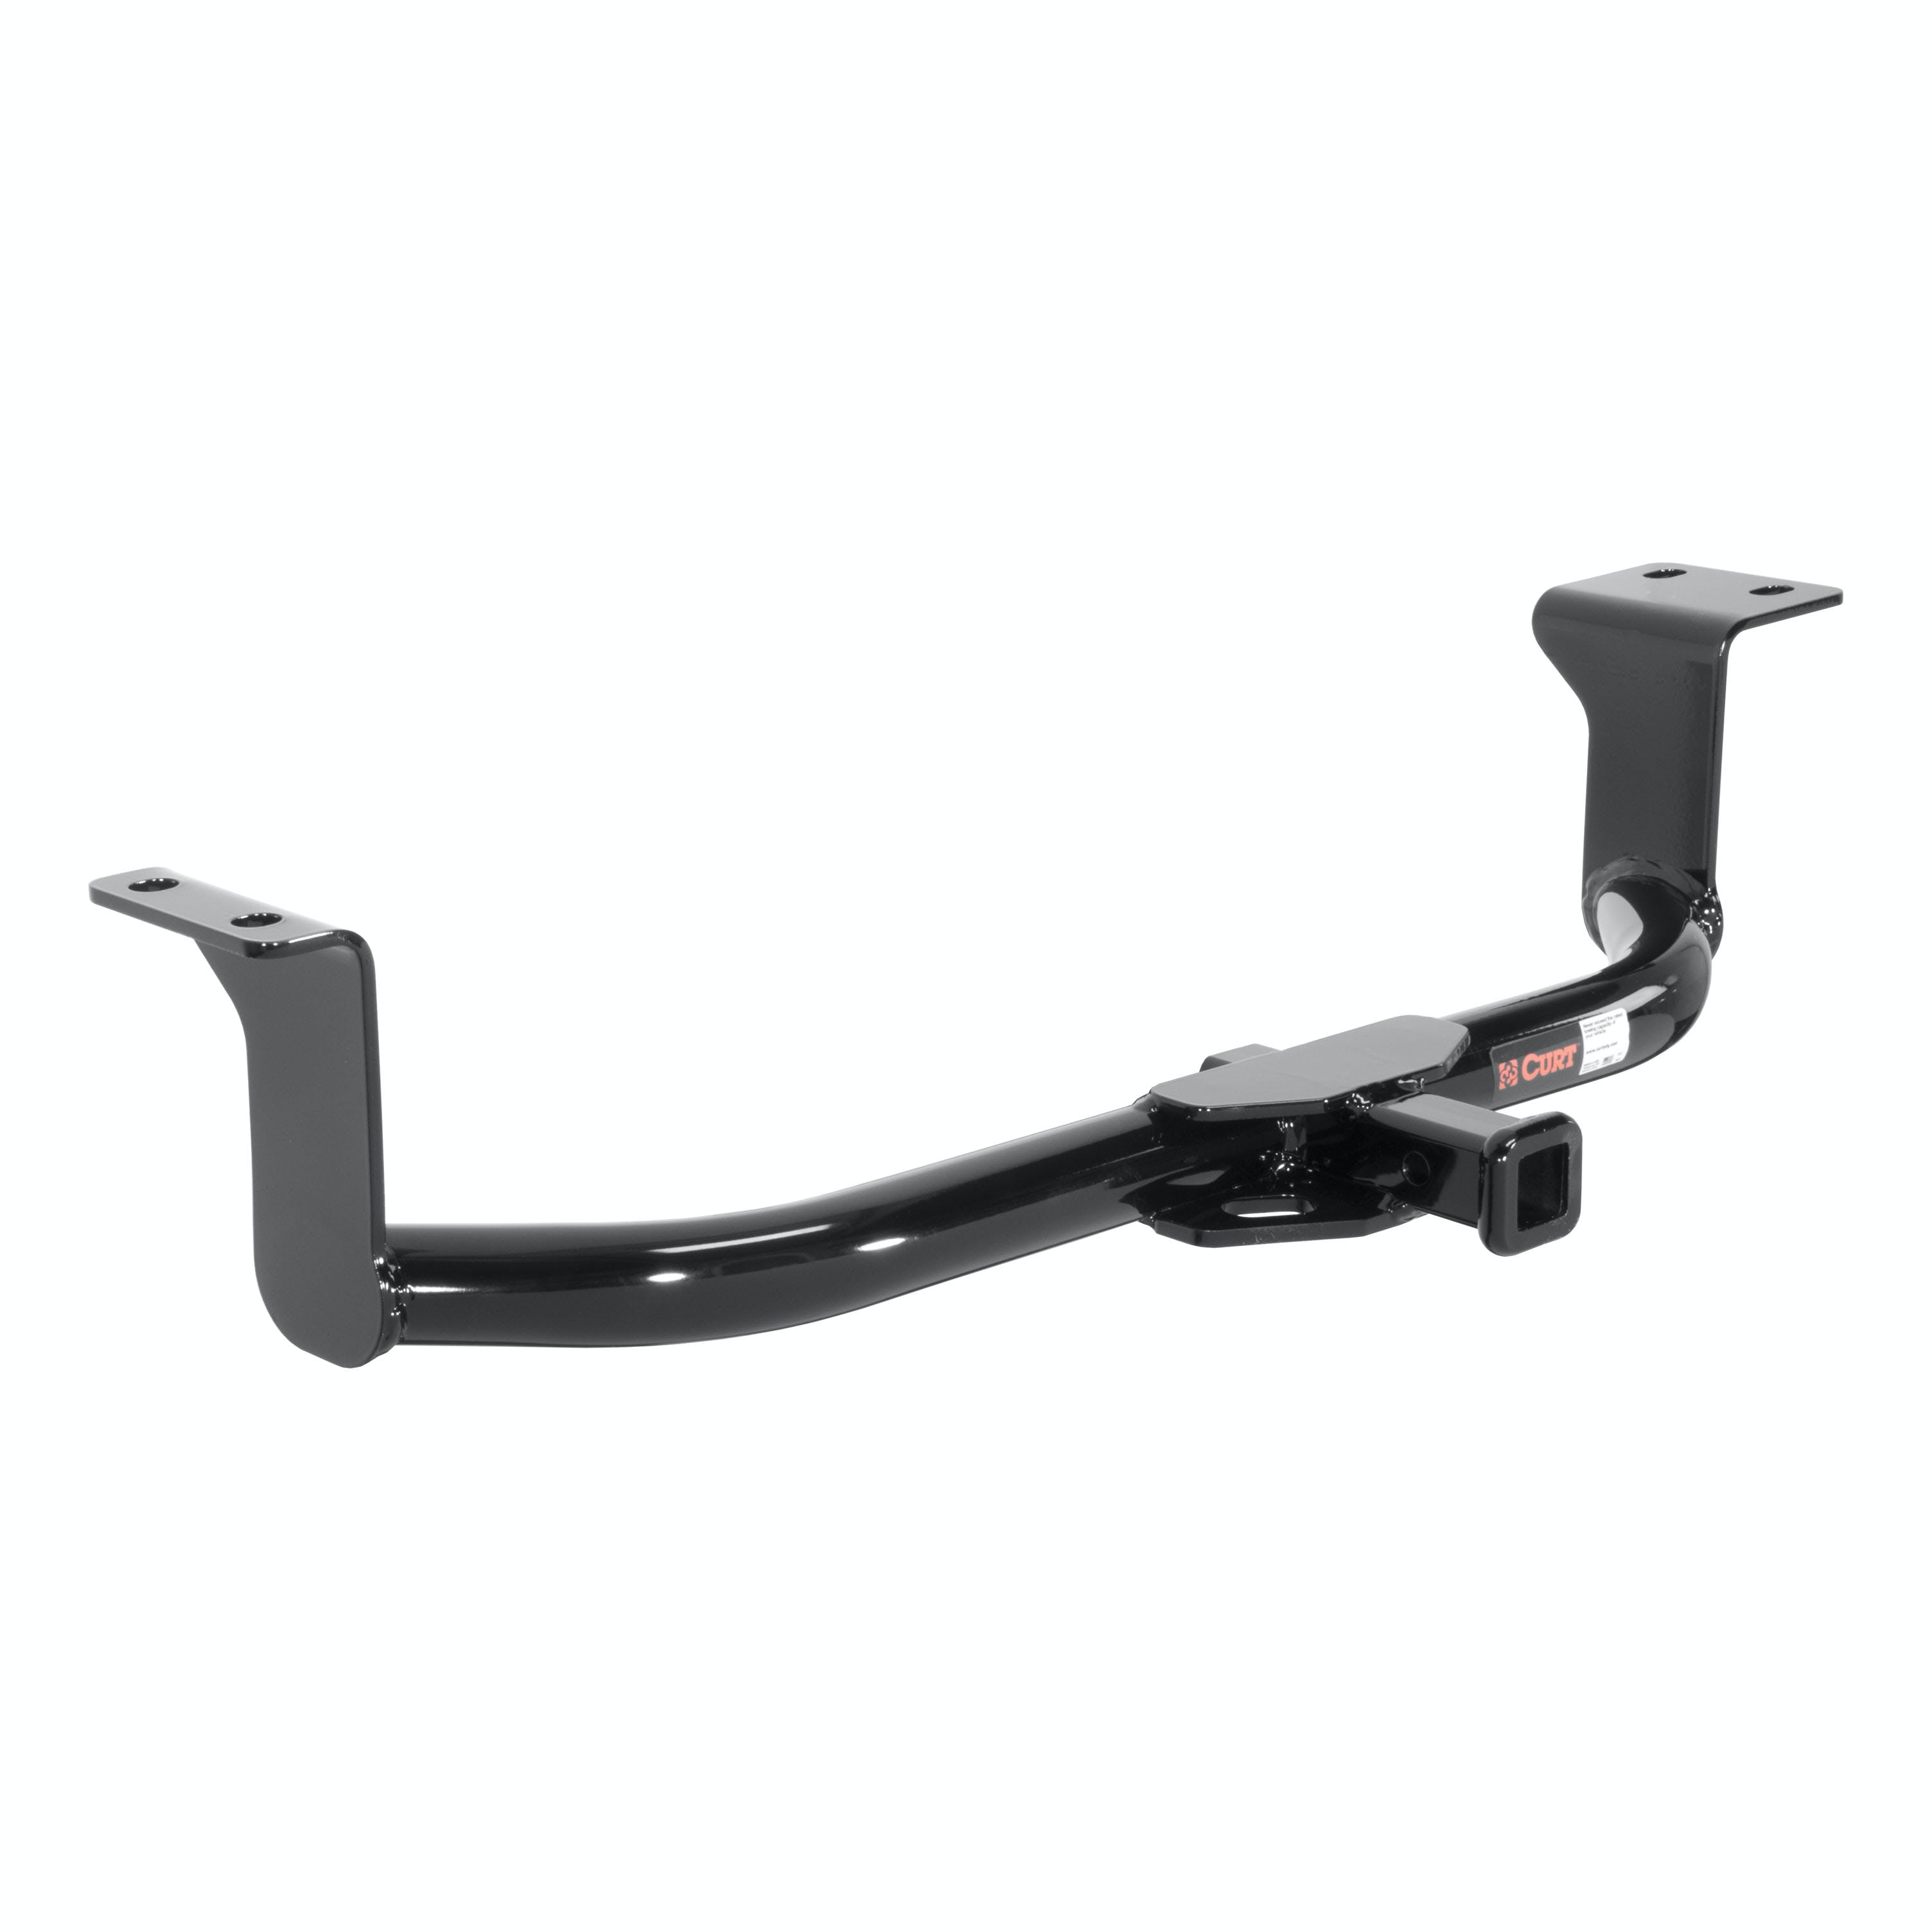 CURT 11276 Class 1 Trailer Hitch, 1-1/4 Receiver, Select Toyota Prius